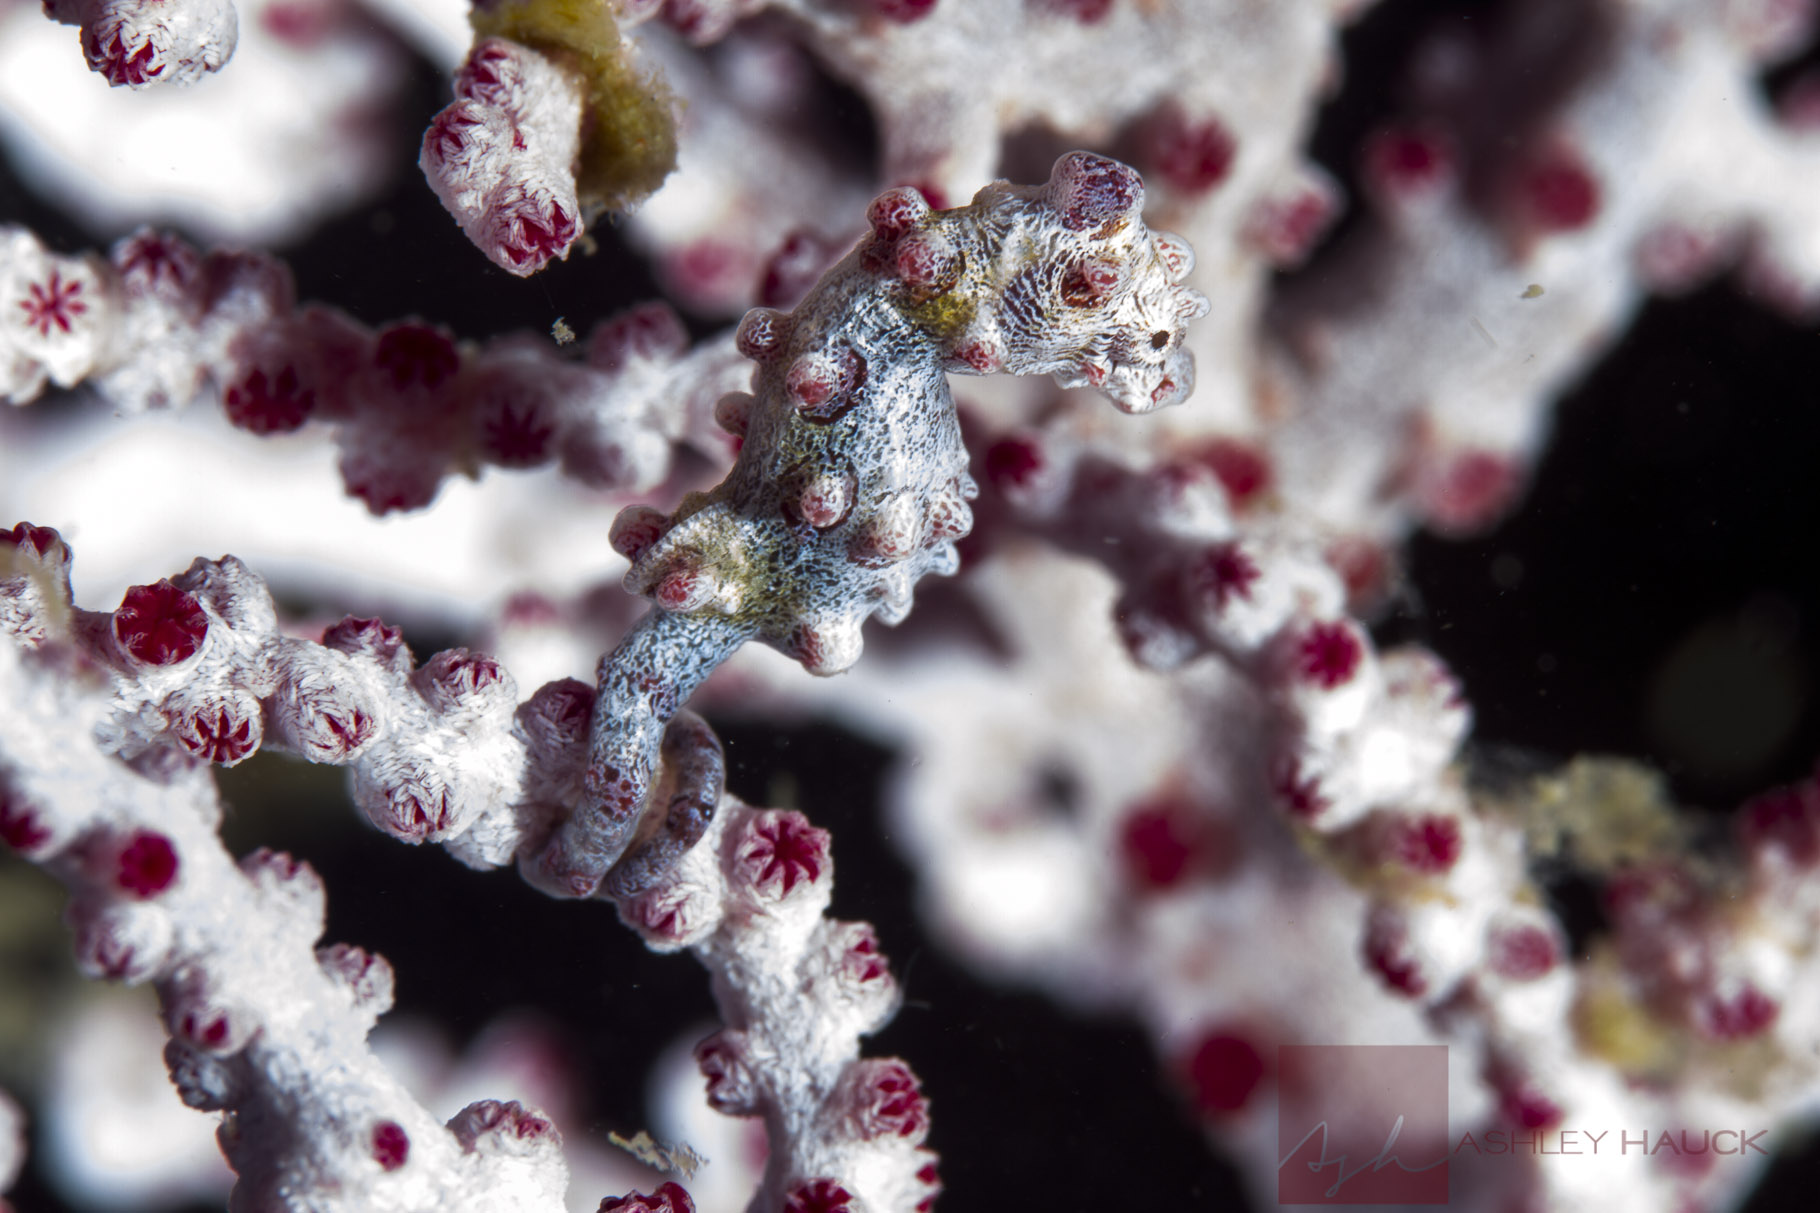 In Pursuit of Pygmy Seahorses